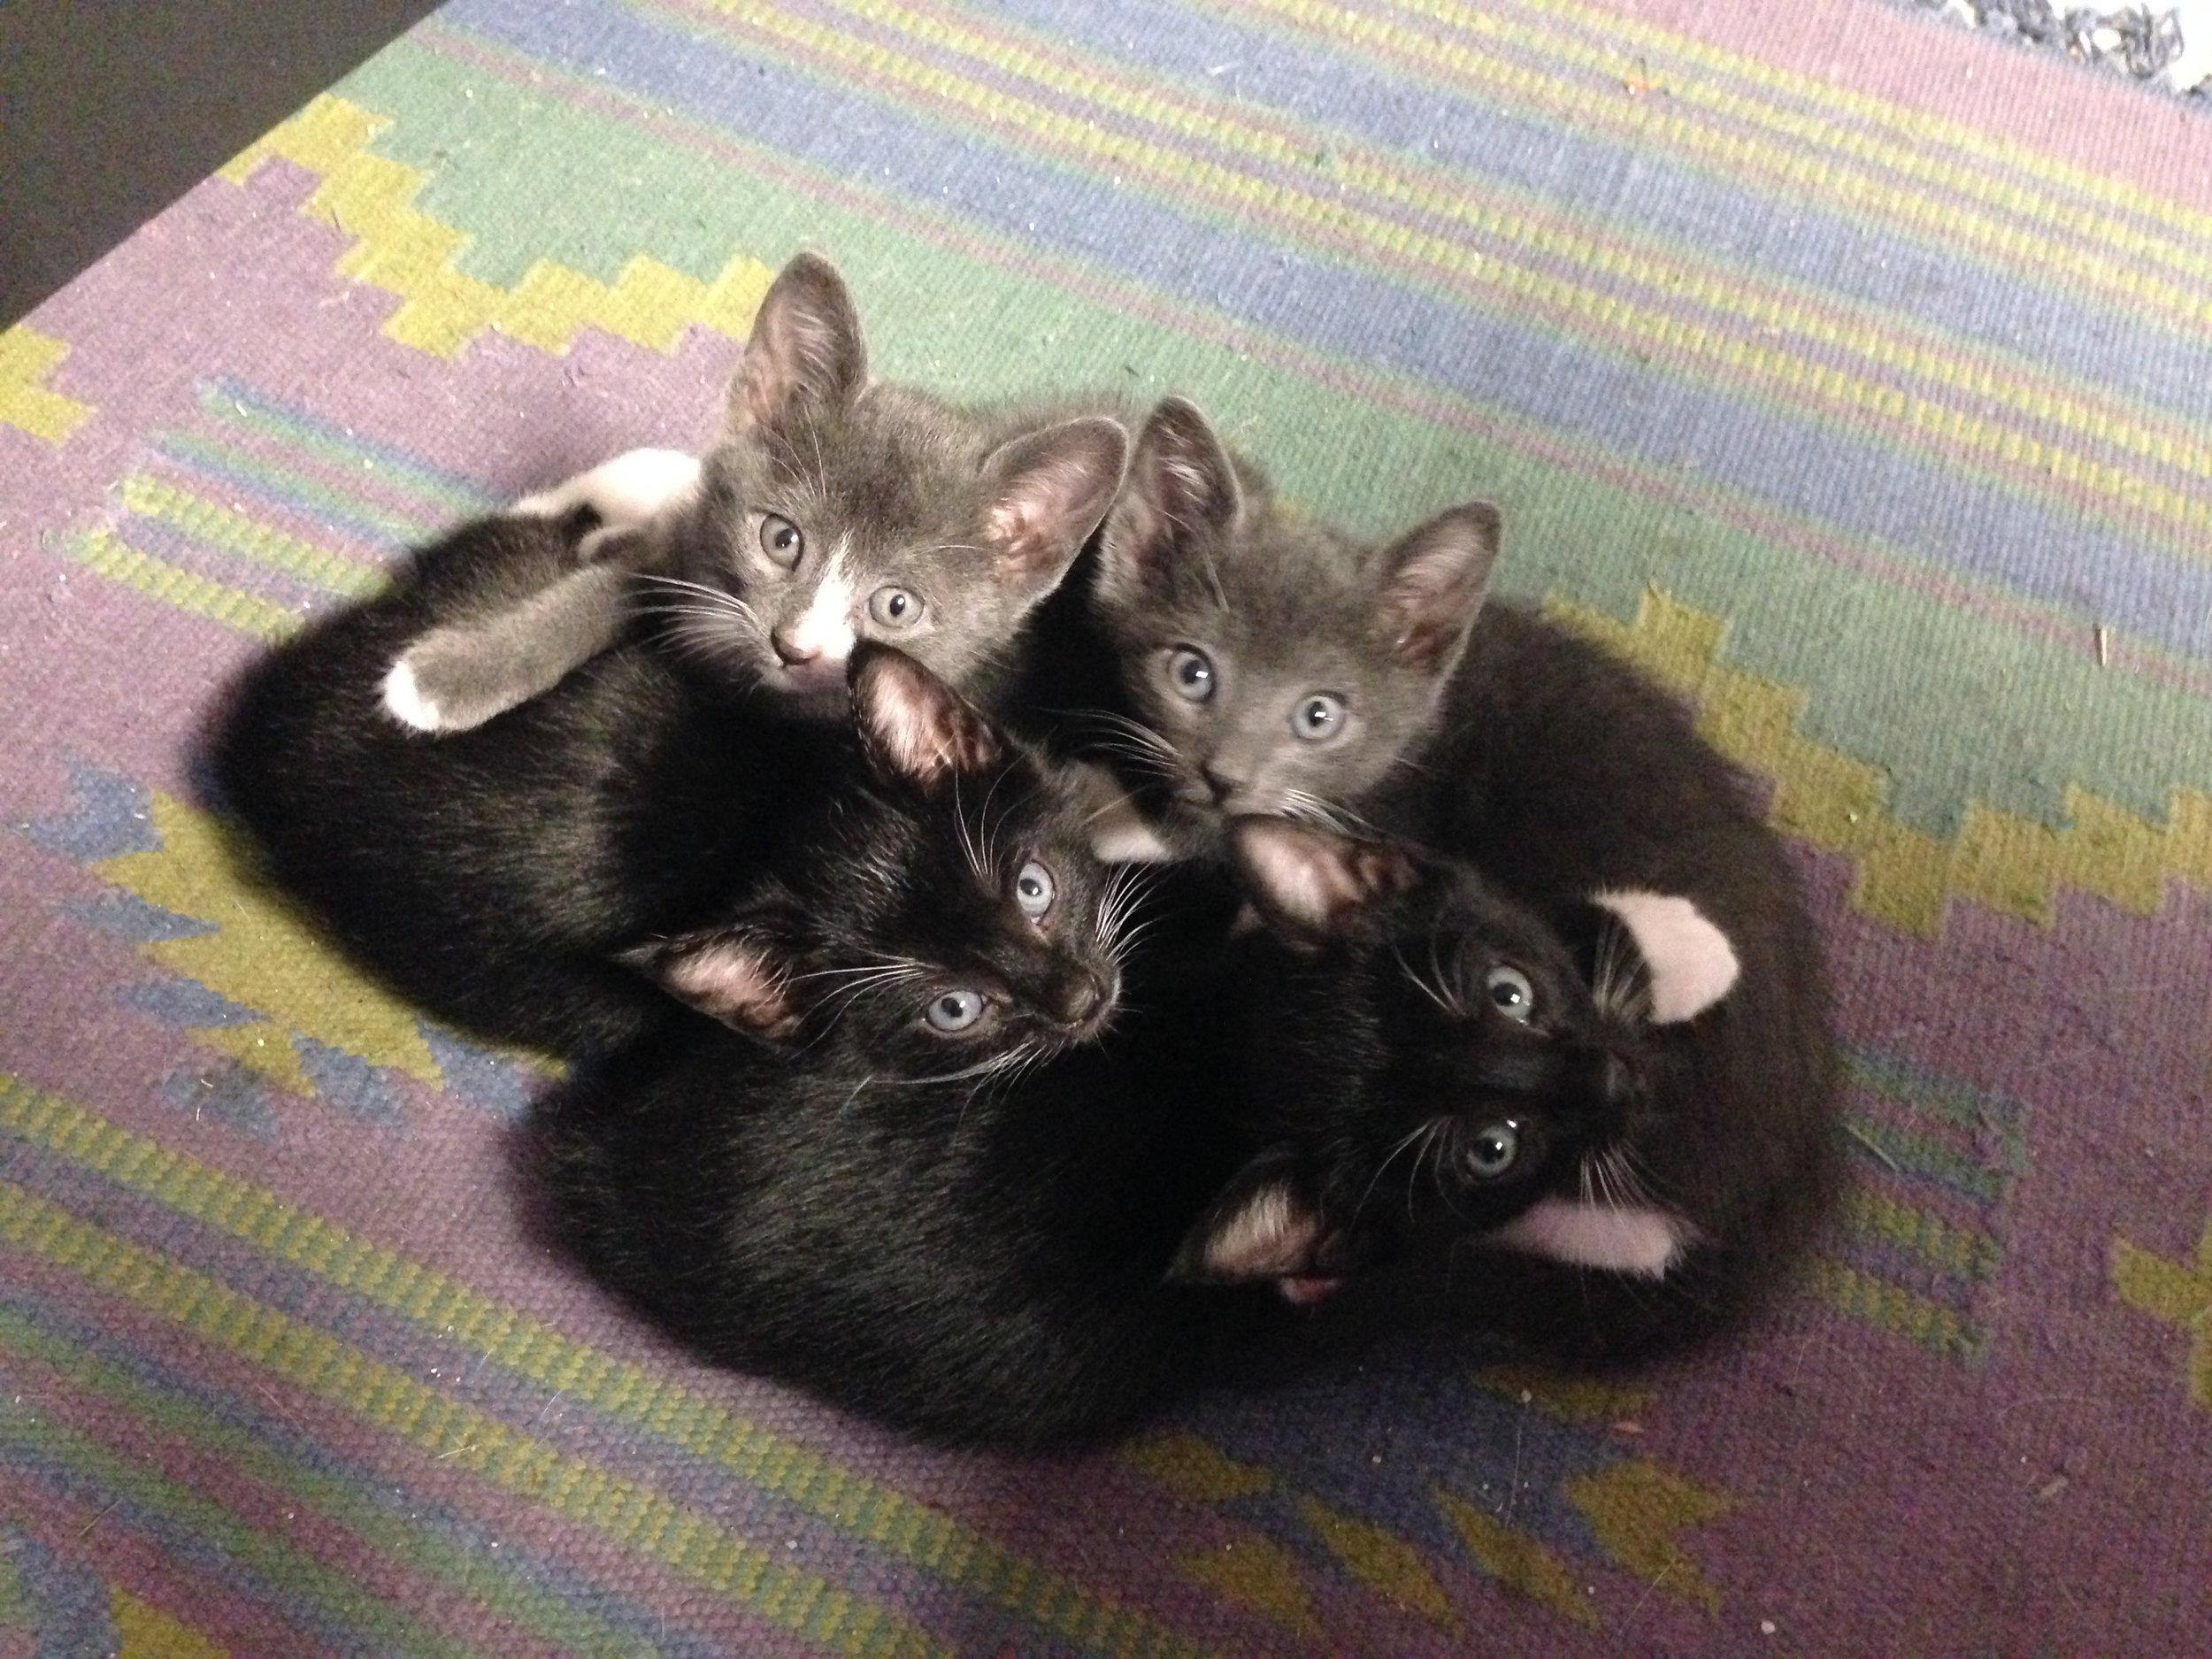 PowerSport office kittens need adopting, as of 10/10/16 still. Any takers? Let me know!